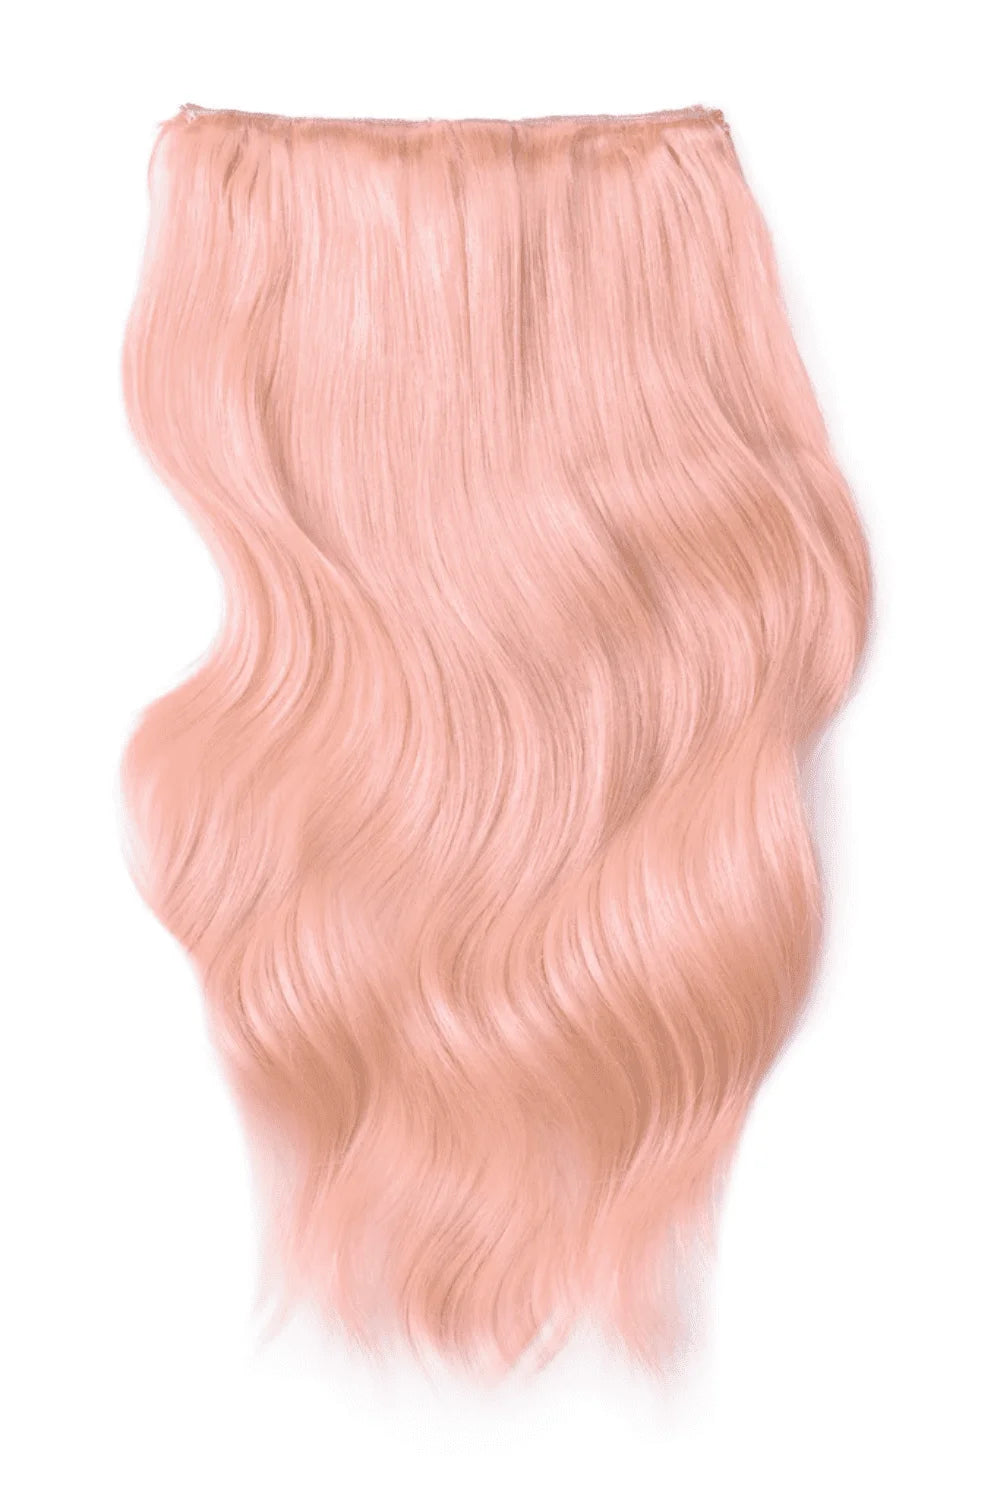 pastel pink double weft hair extension